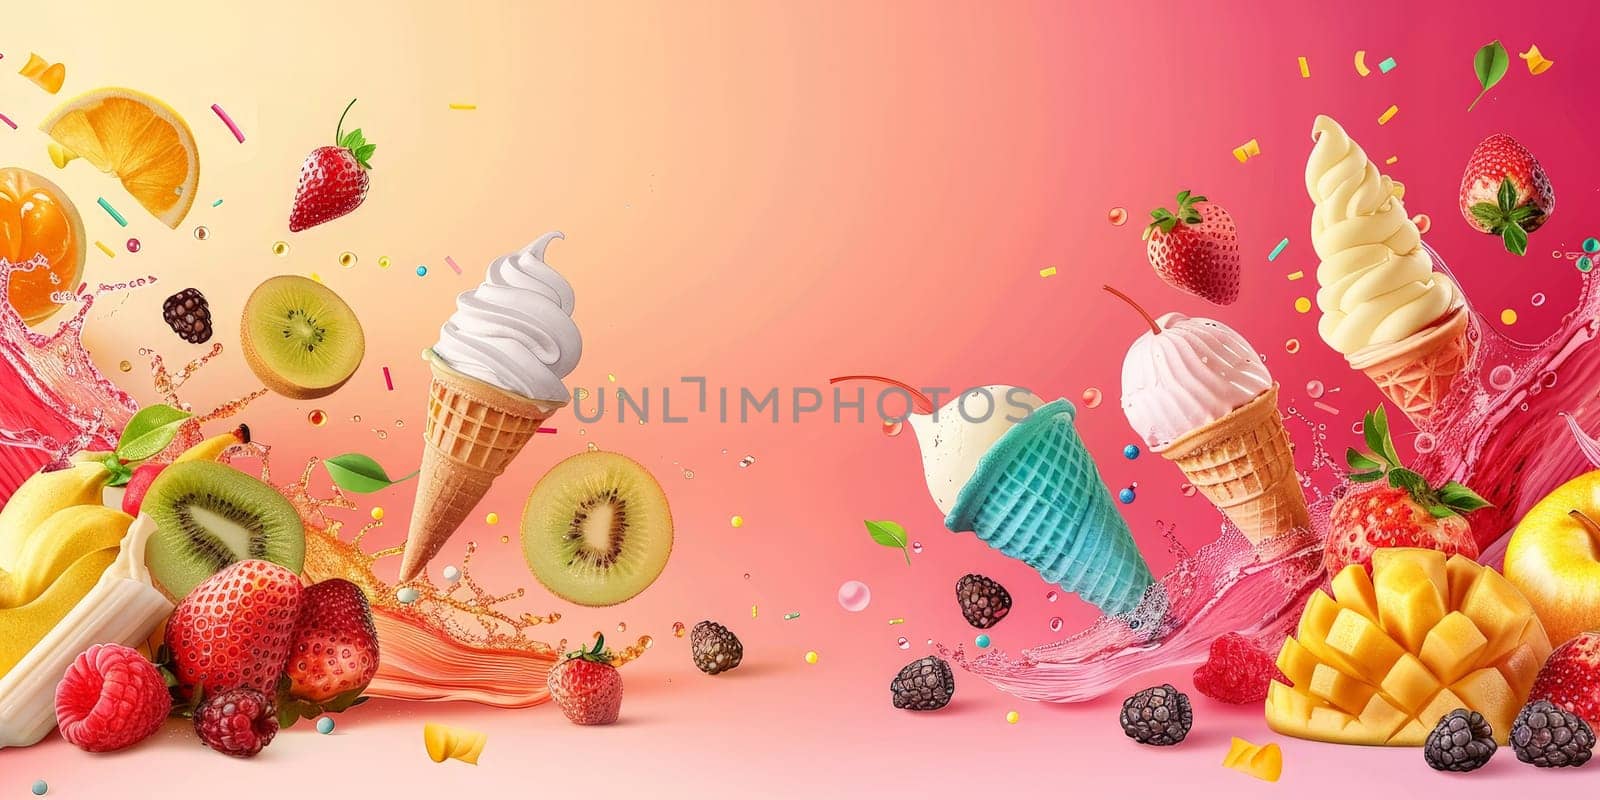 A colorful background with ice cream and fruit on it by nateemee